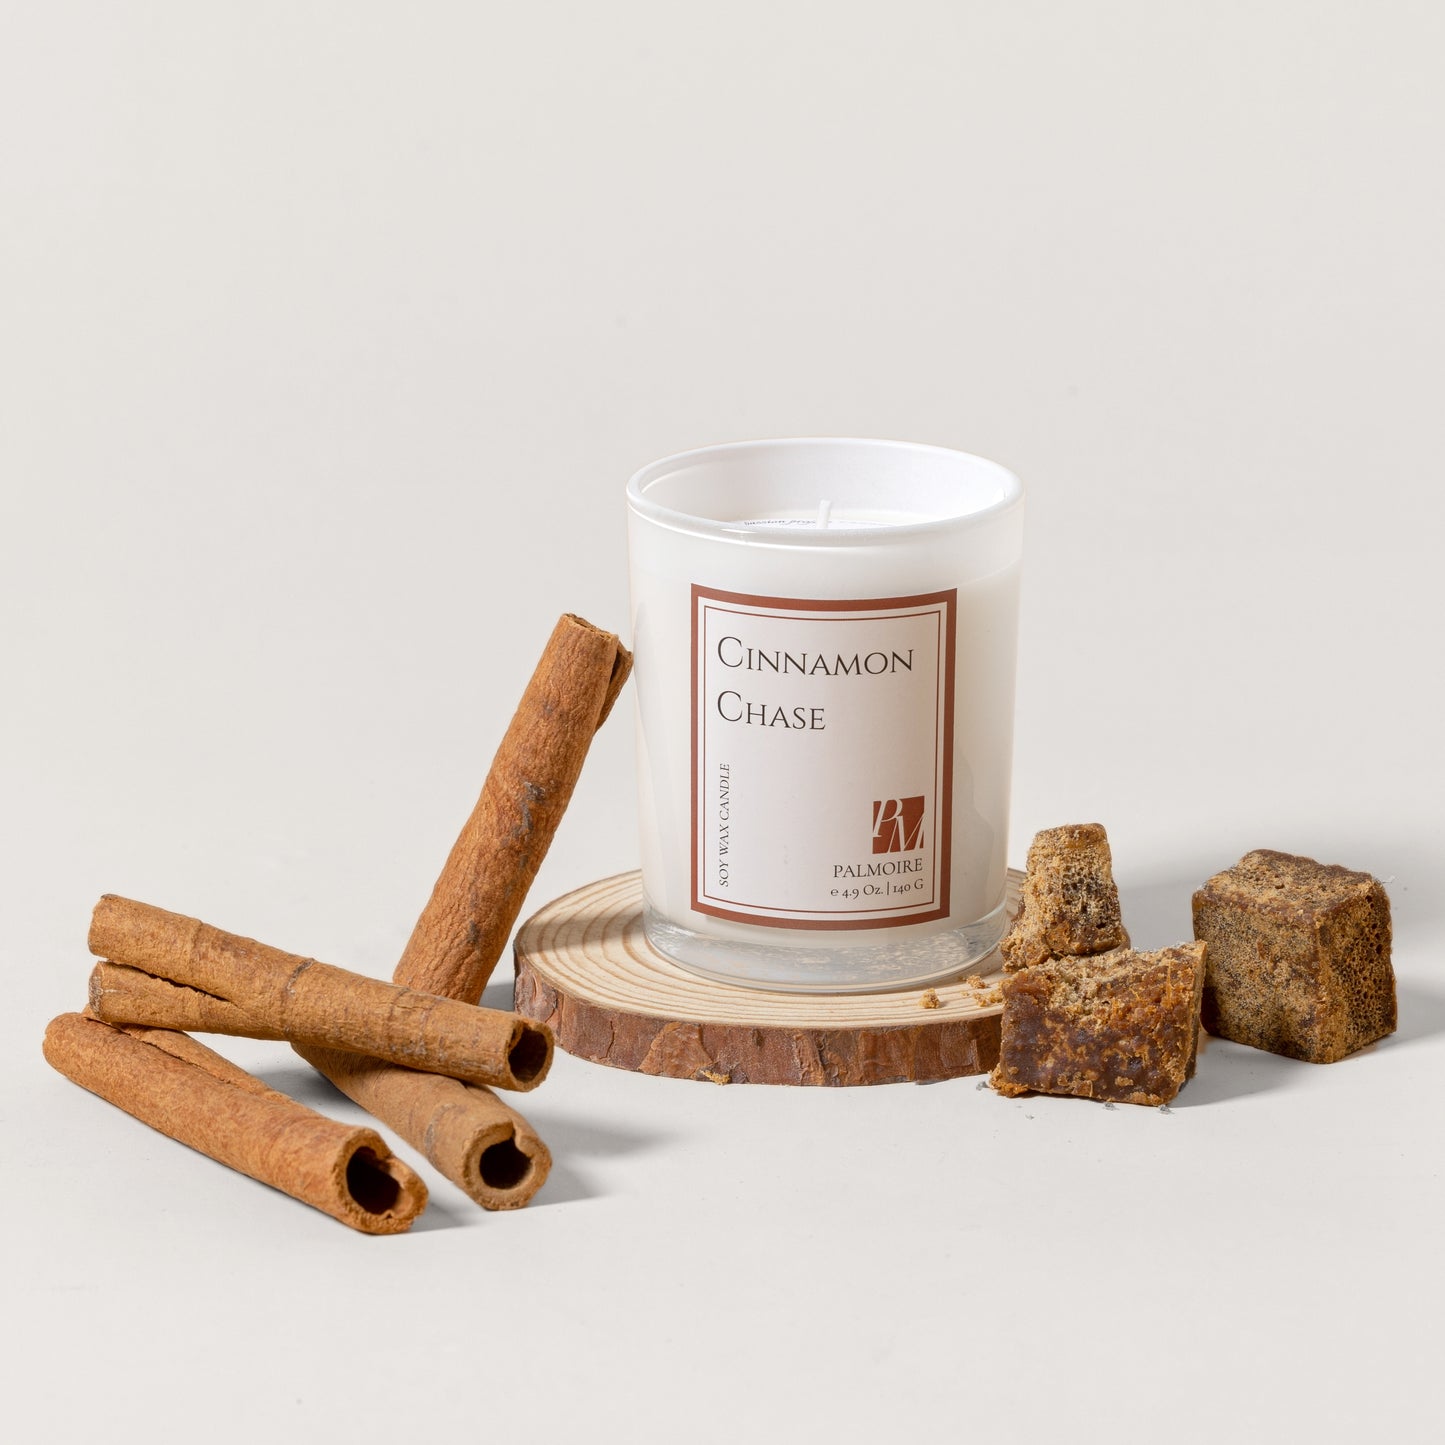 Cinnamon Chase Soy Wax Candle - PALMOIRE